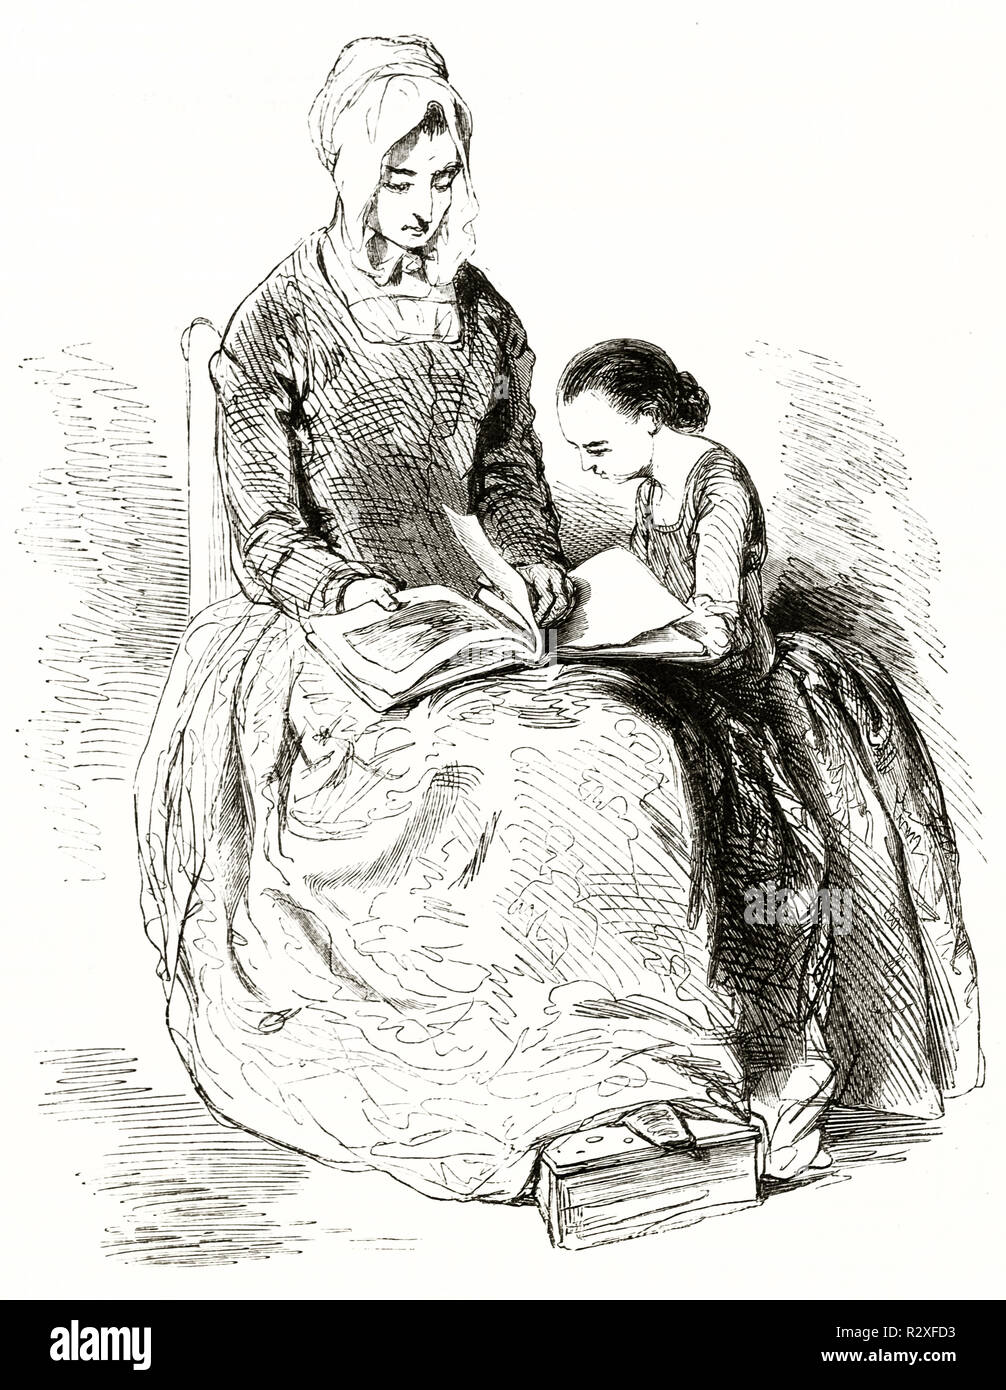 Old illustration of woman and girl browsing a picture book. By Gavarni, publ. on Magasin Pittoresque, Paris, 1846 Stock Photo